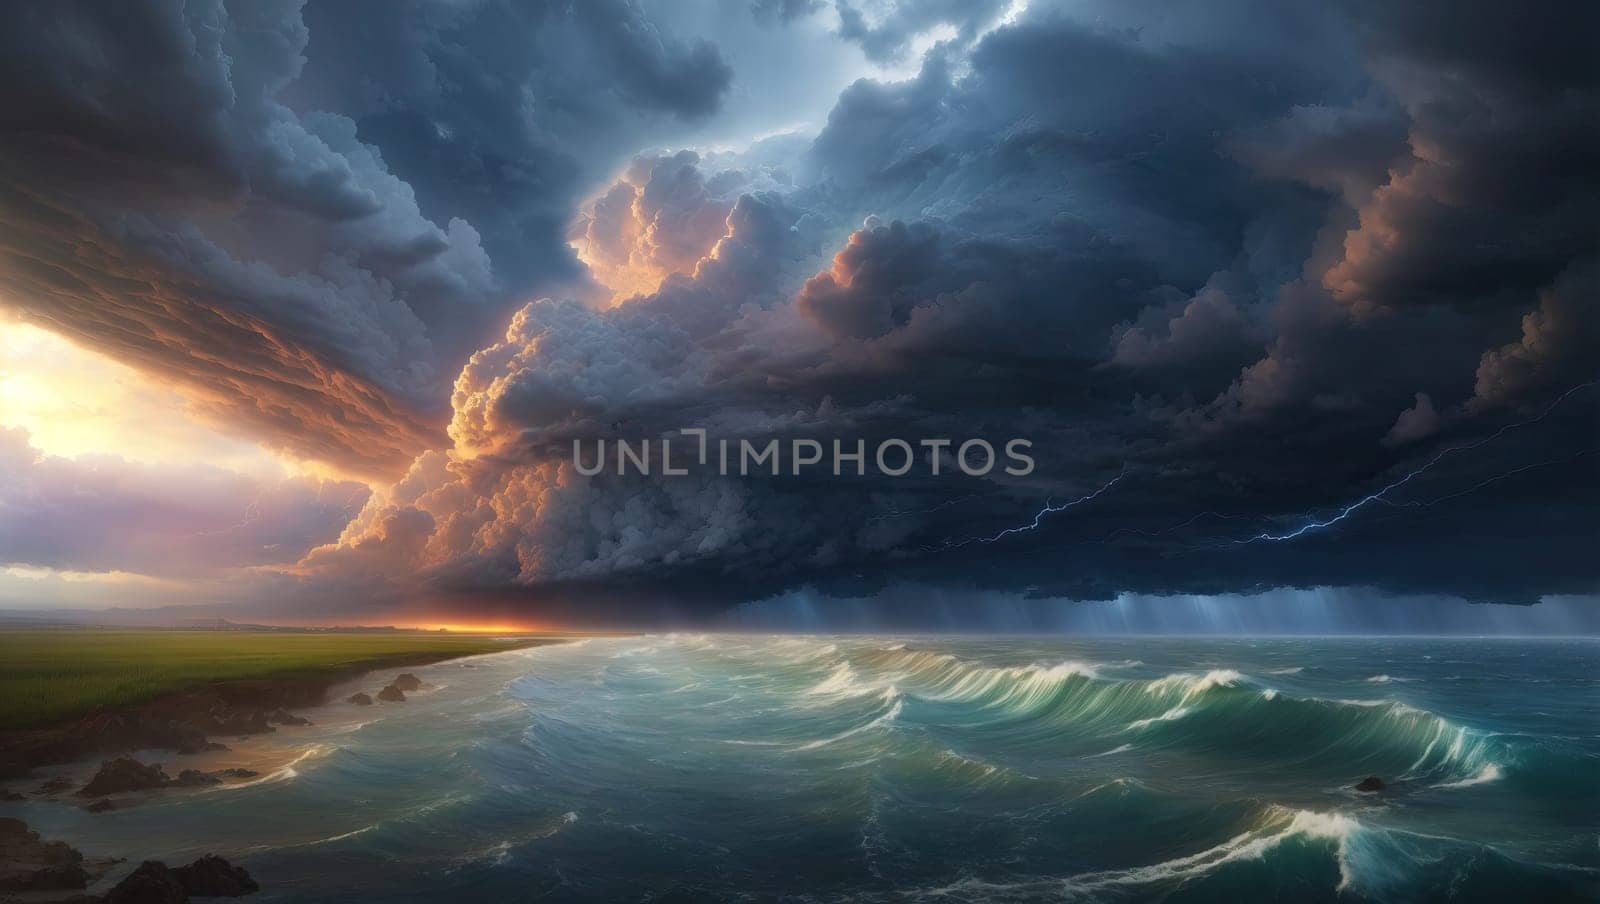 Epic storm over the ocean shore by applesstock